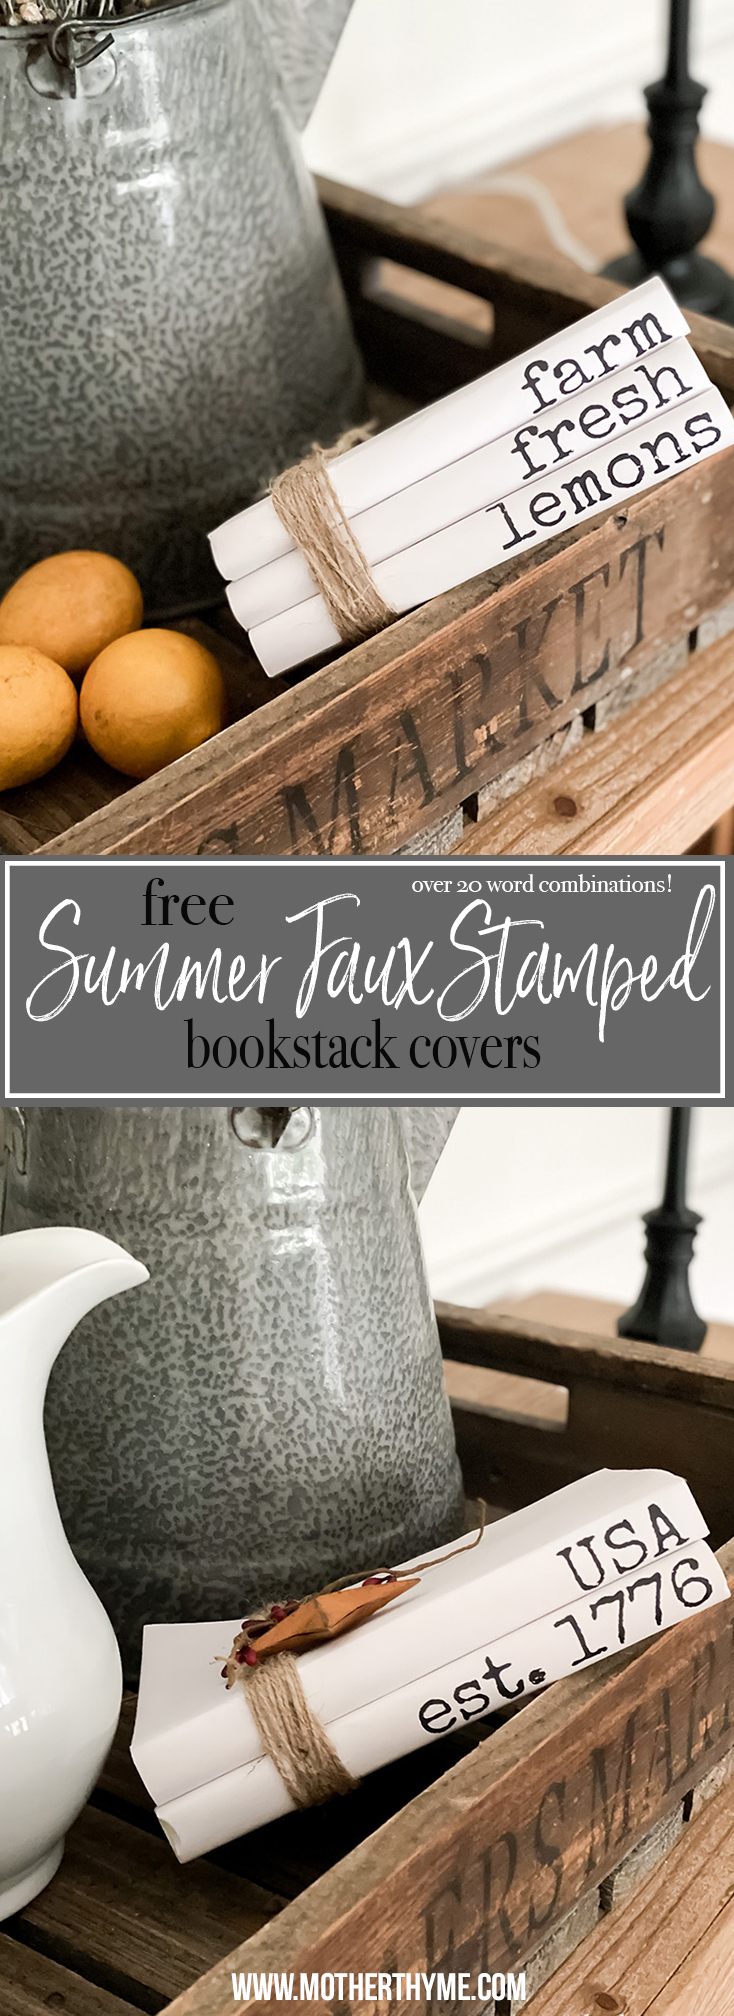 SUMMER FAUX STAMPED BOOKSTACK COLLECTION - FREE BOOK COVER PRINTABLES